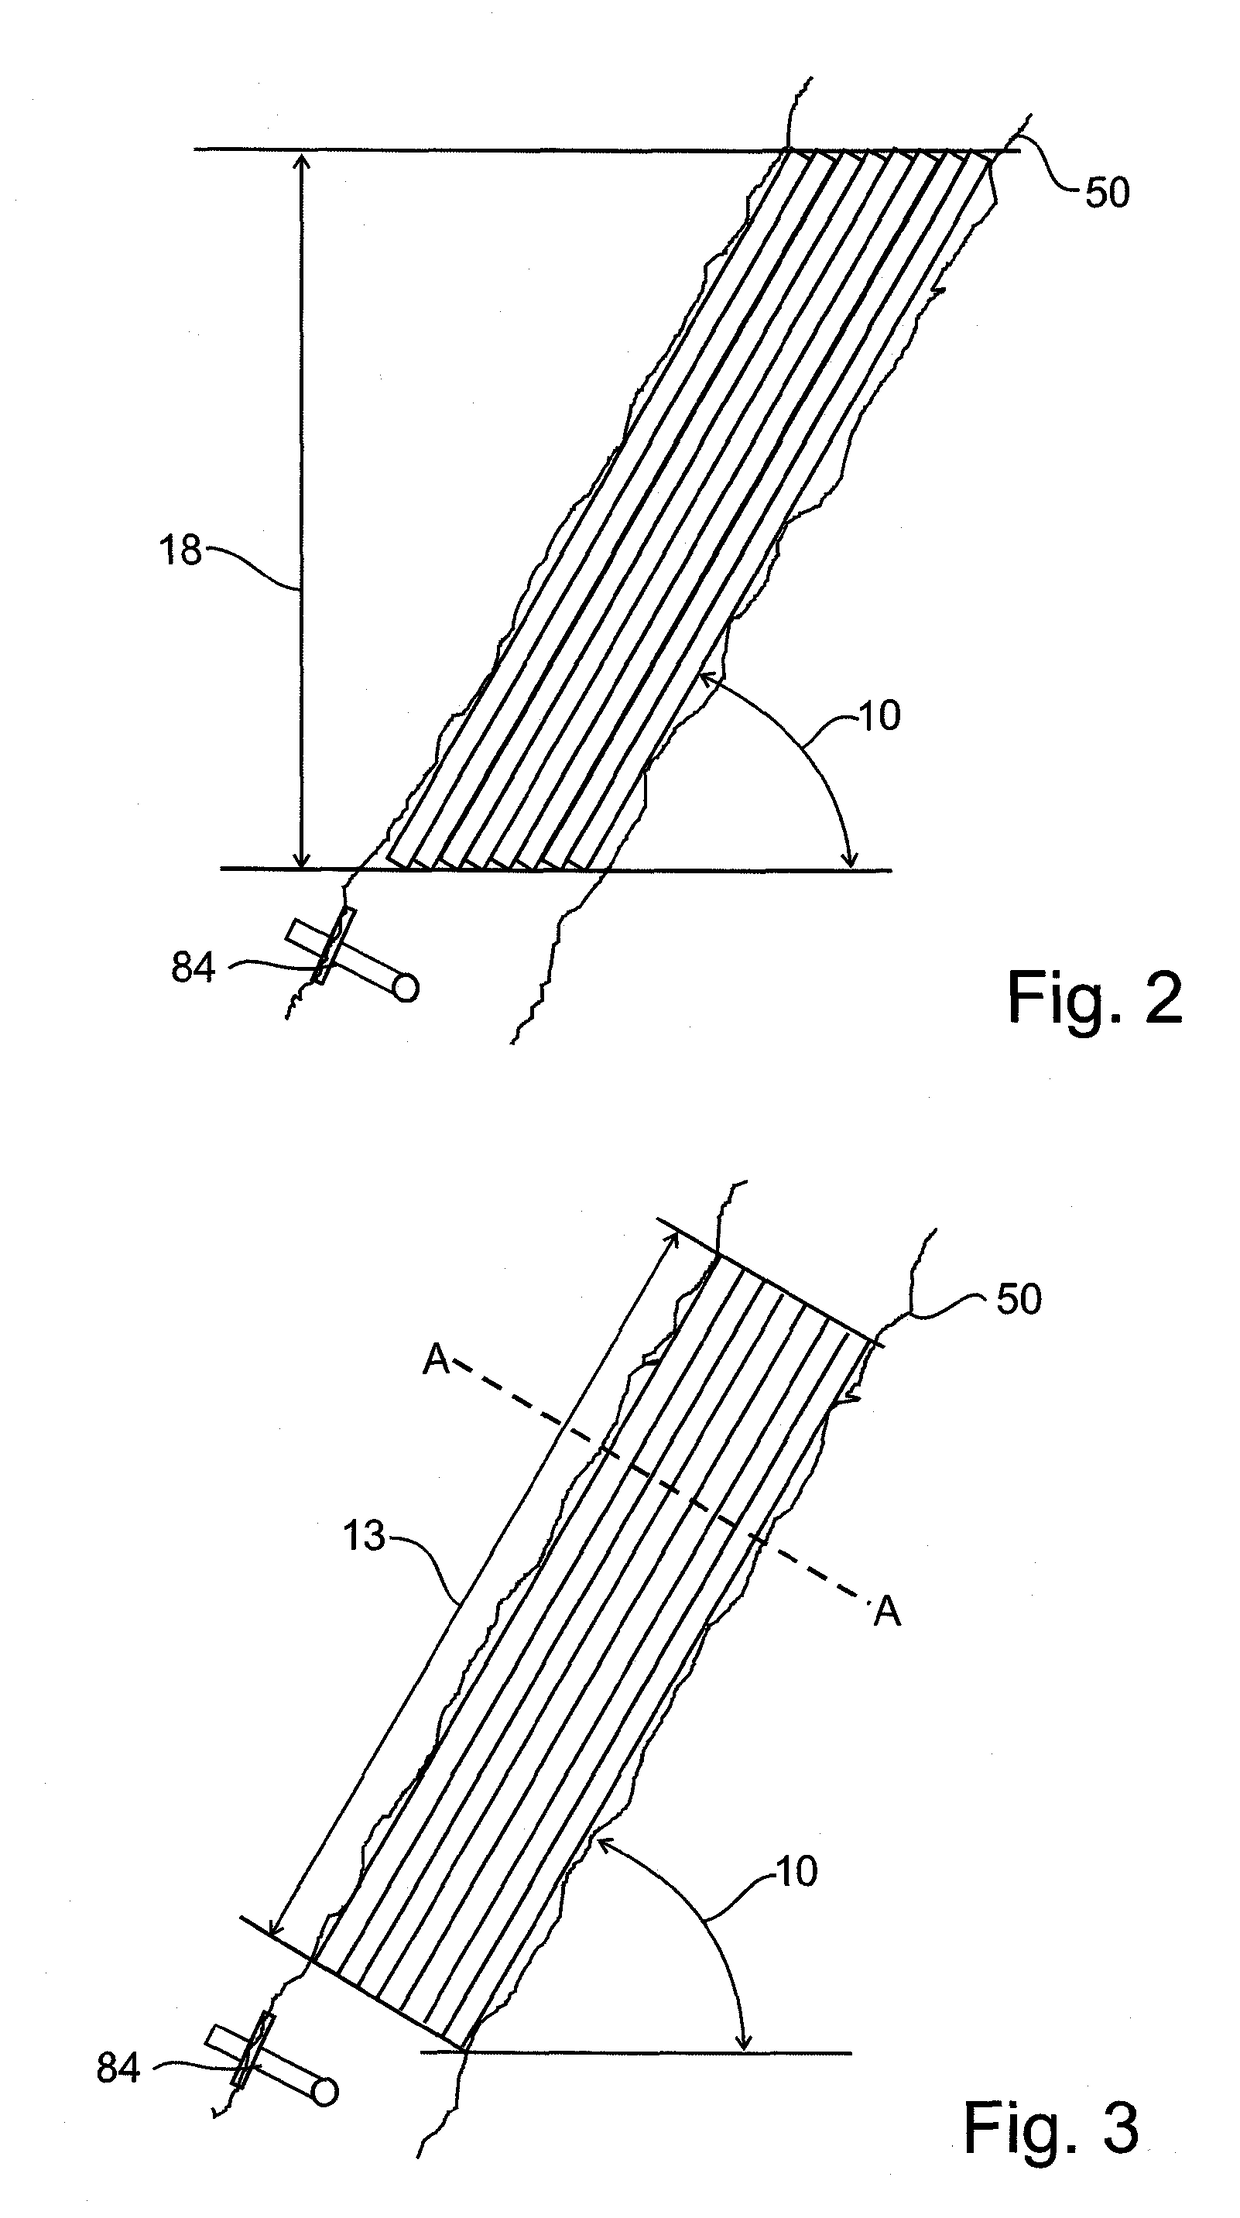 One-way separator for retaining and recirculating cells